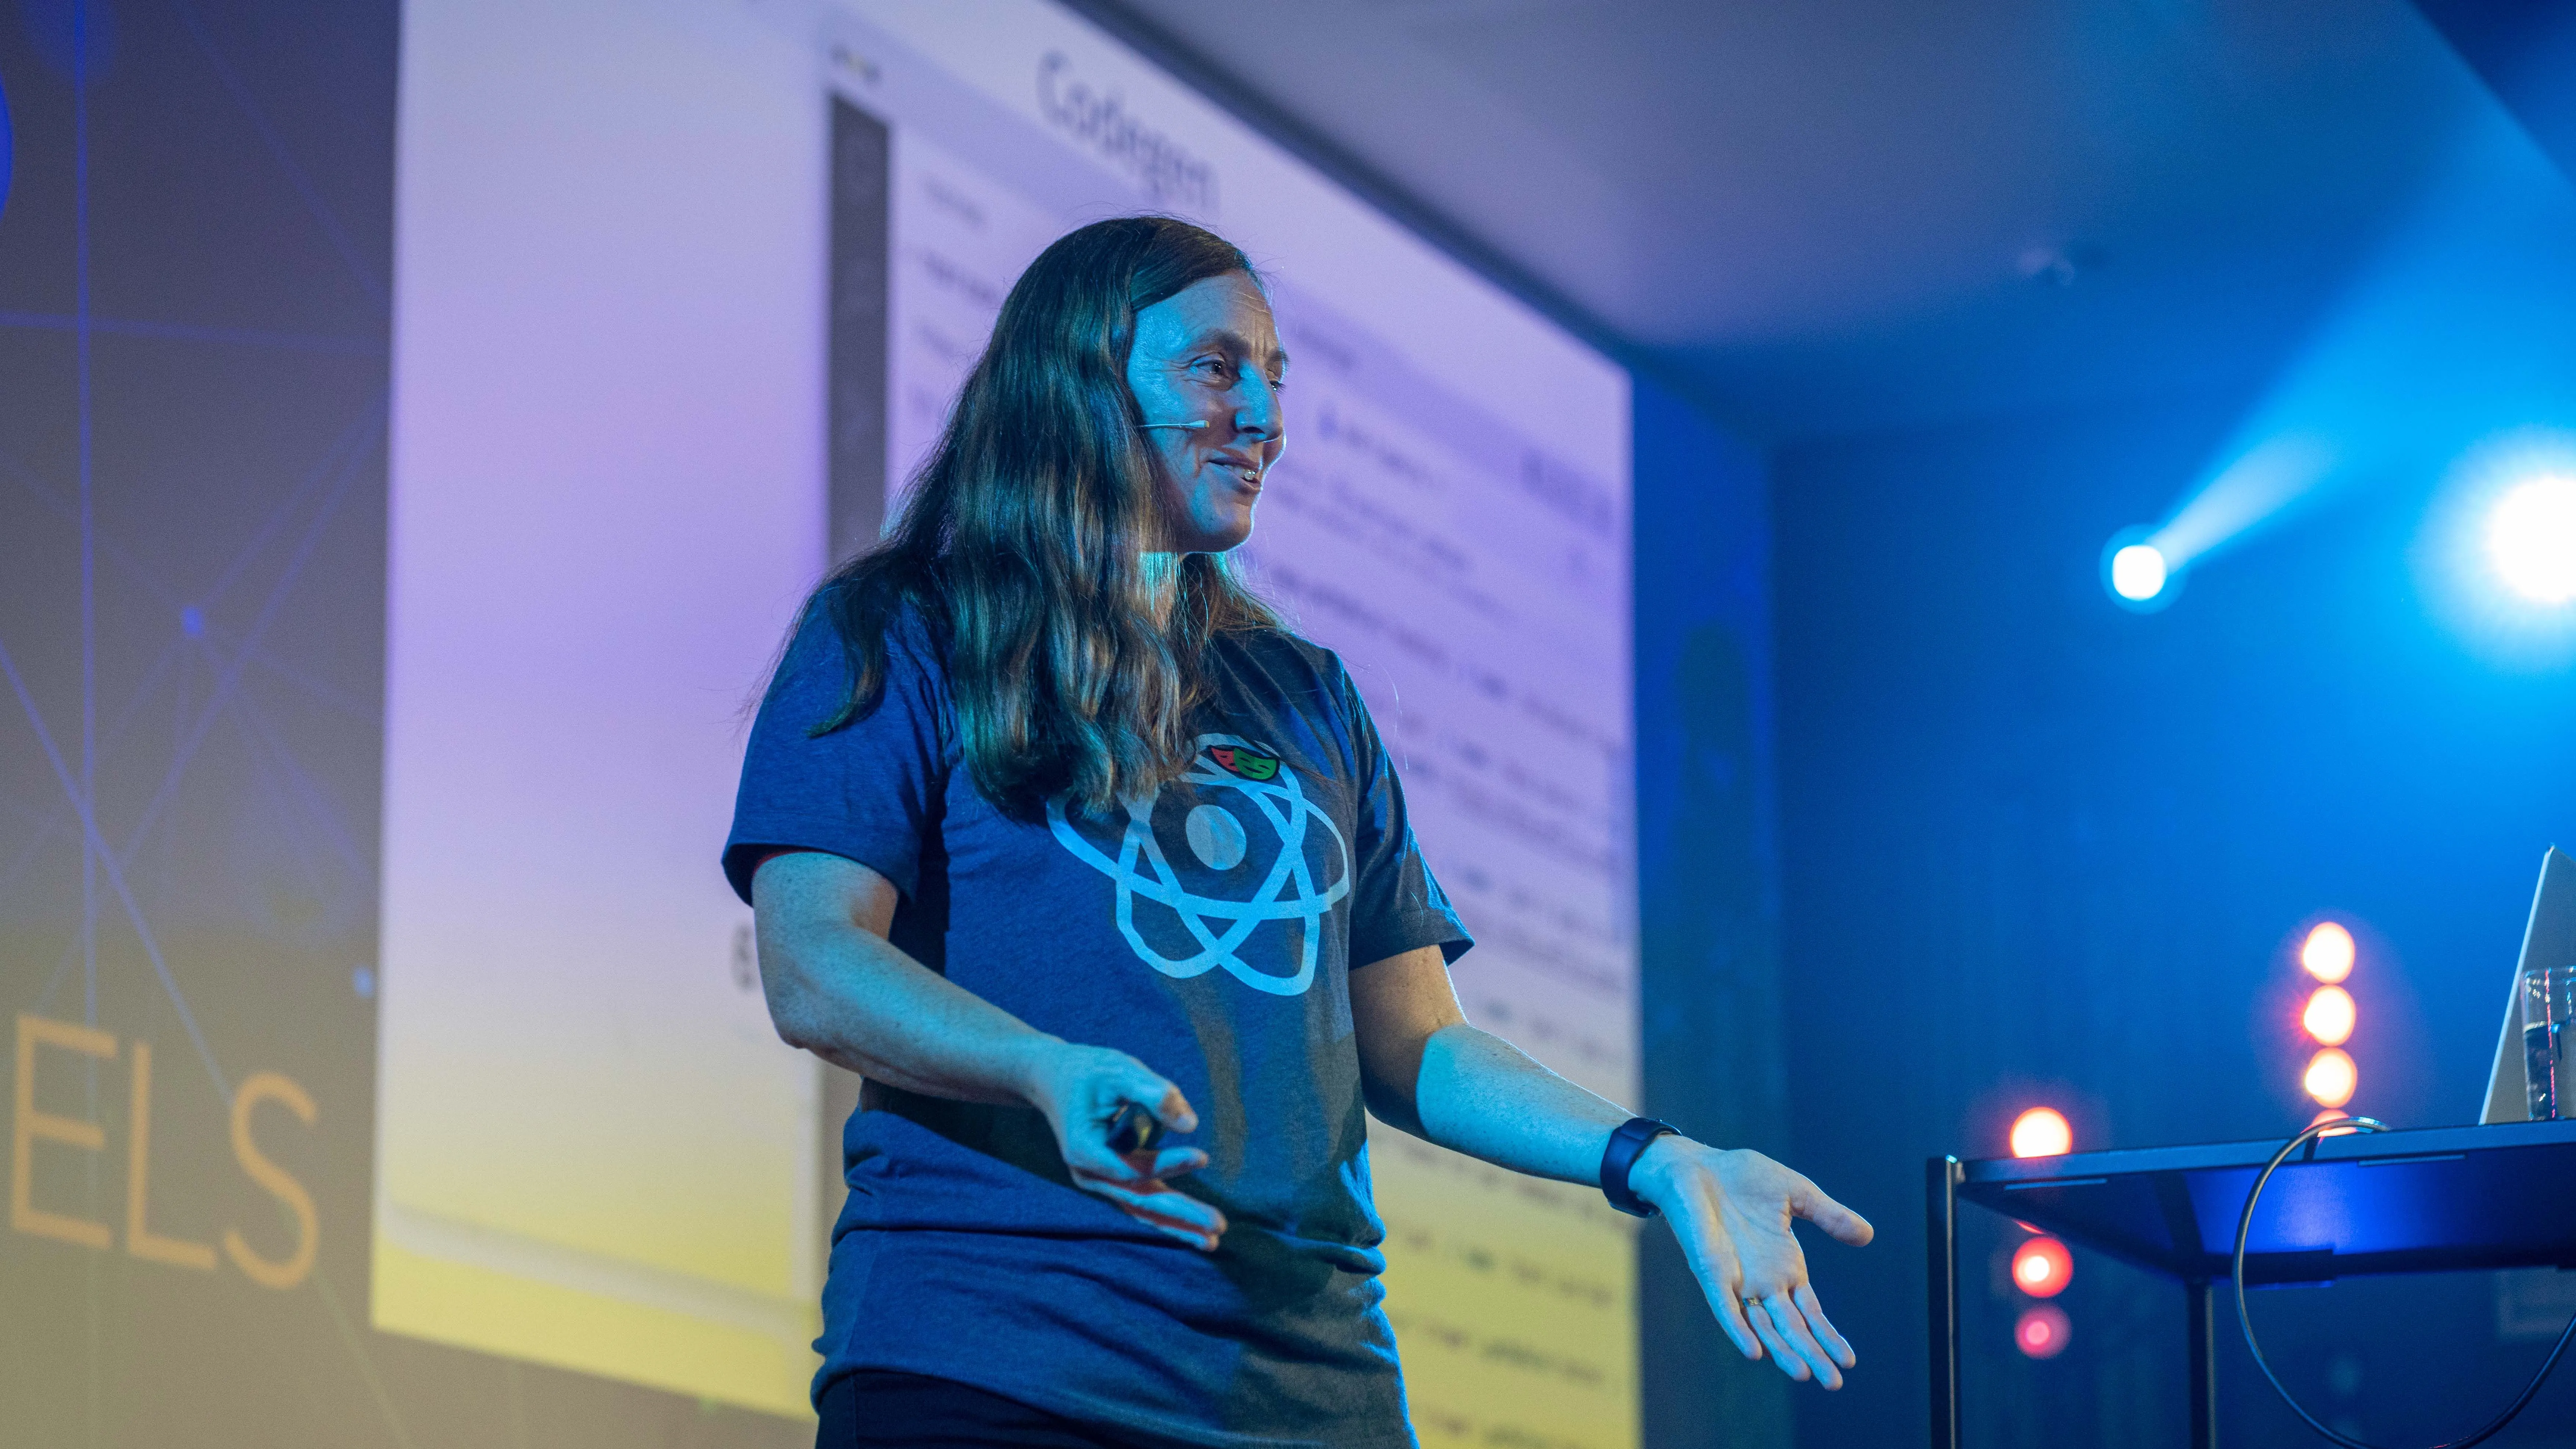 Debbie O'brien giving a talk at React Brussels 2021